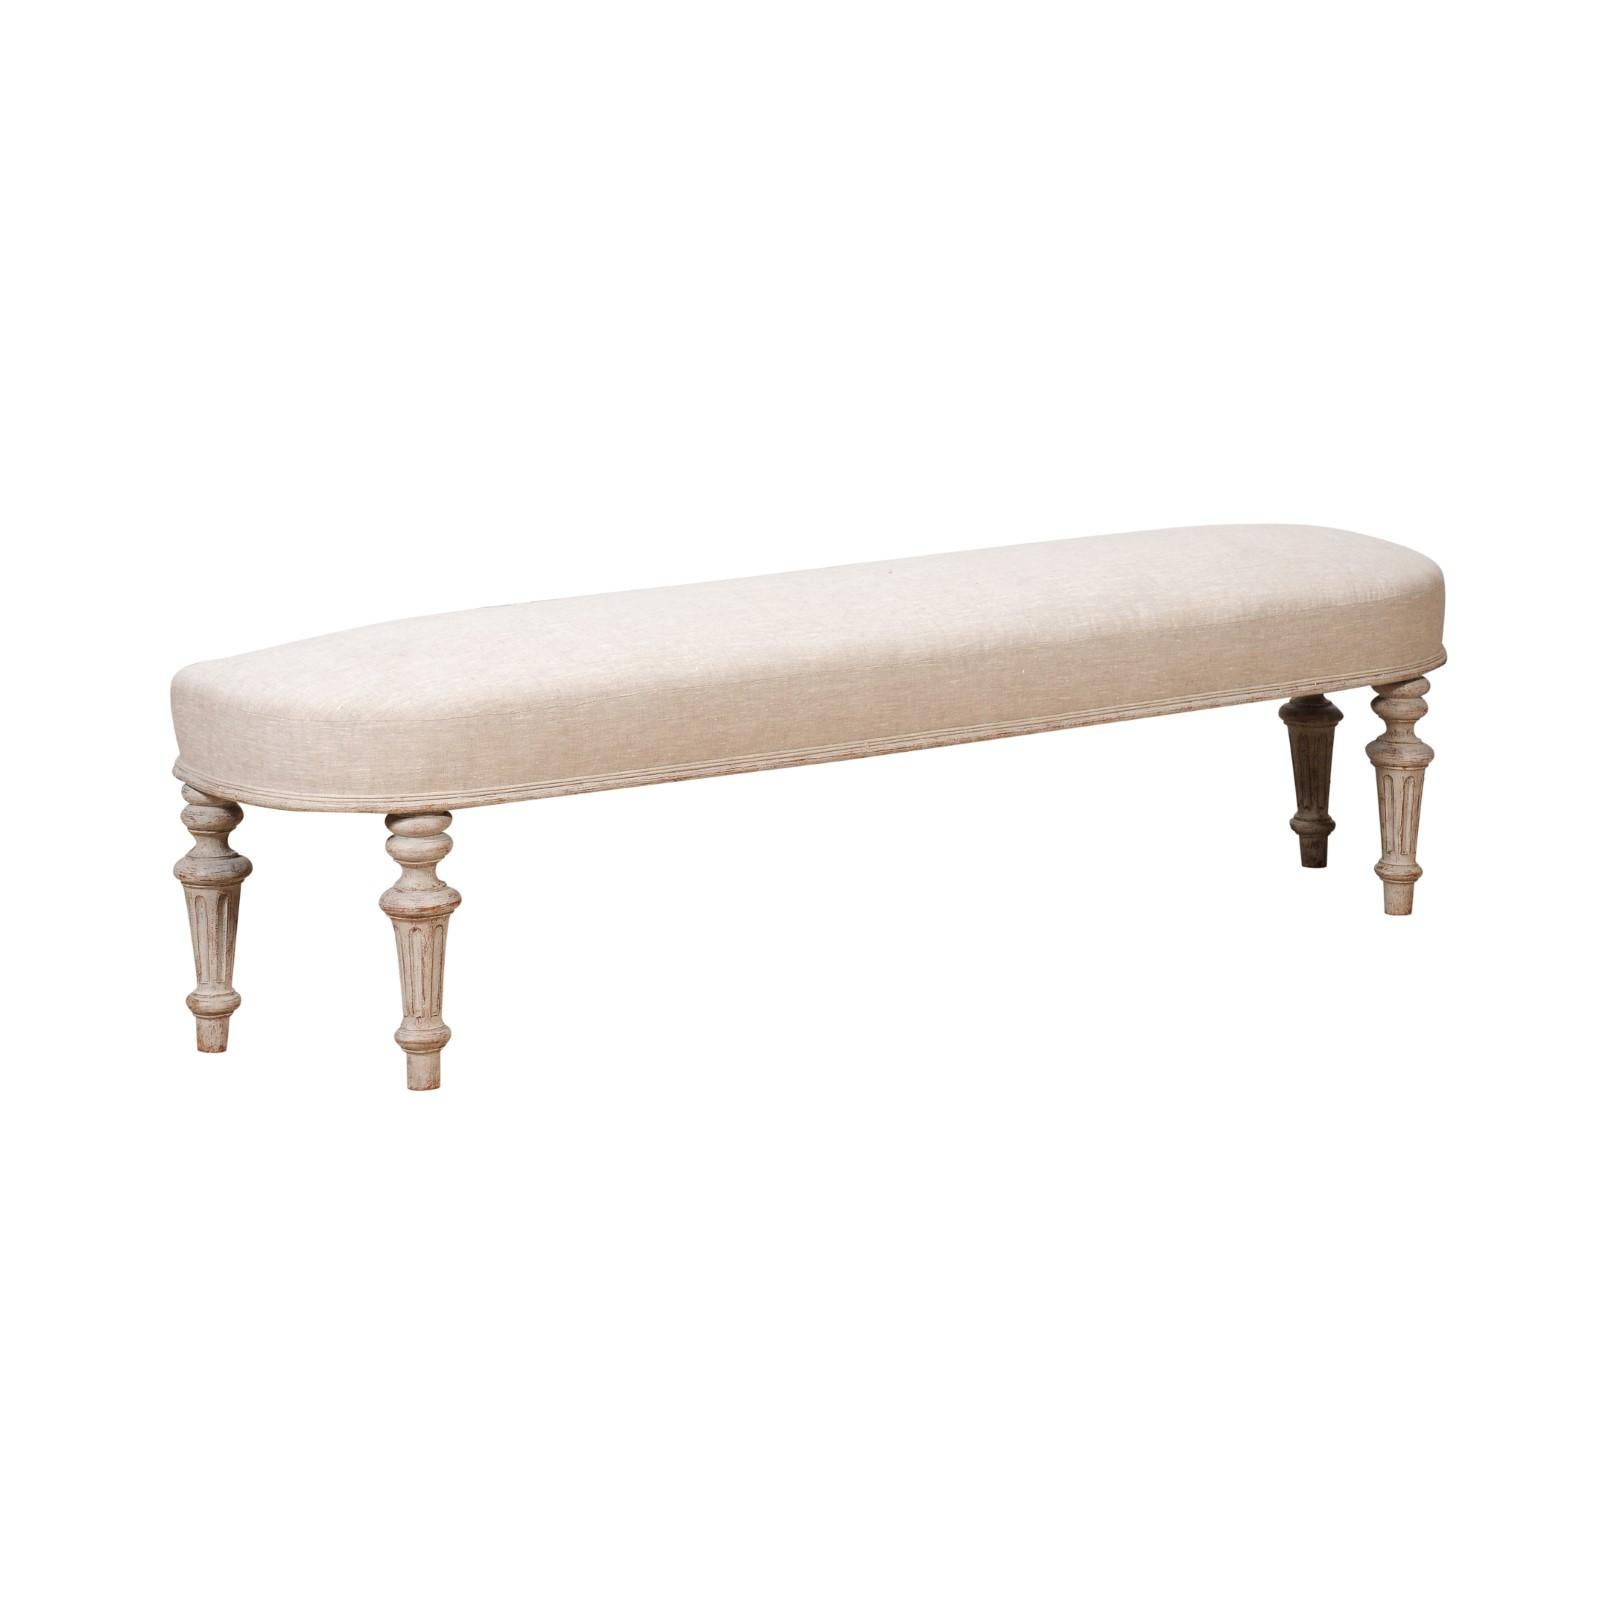 Swedish Neoclassical Style 1860s Painted Bench with Carved Fluted Legs For Sale 7